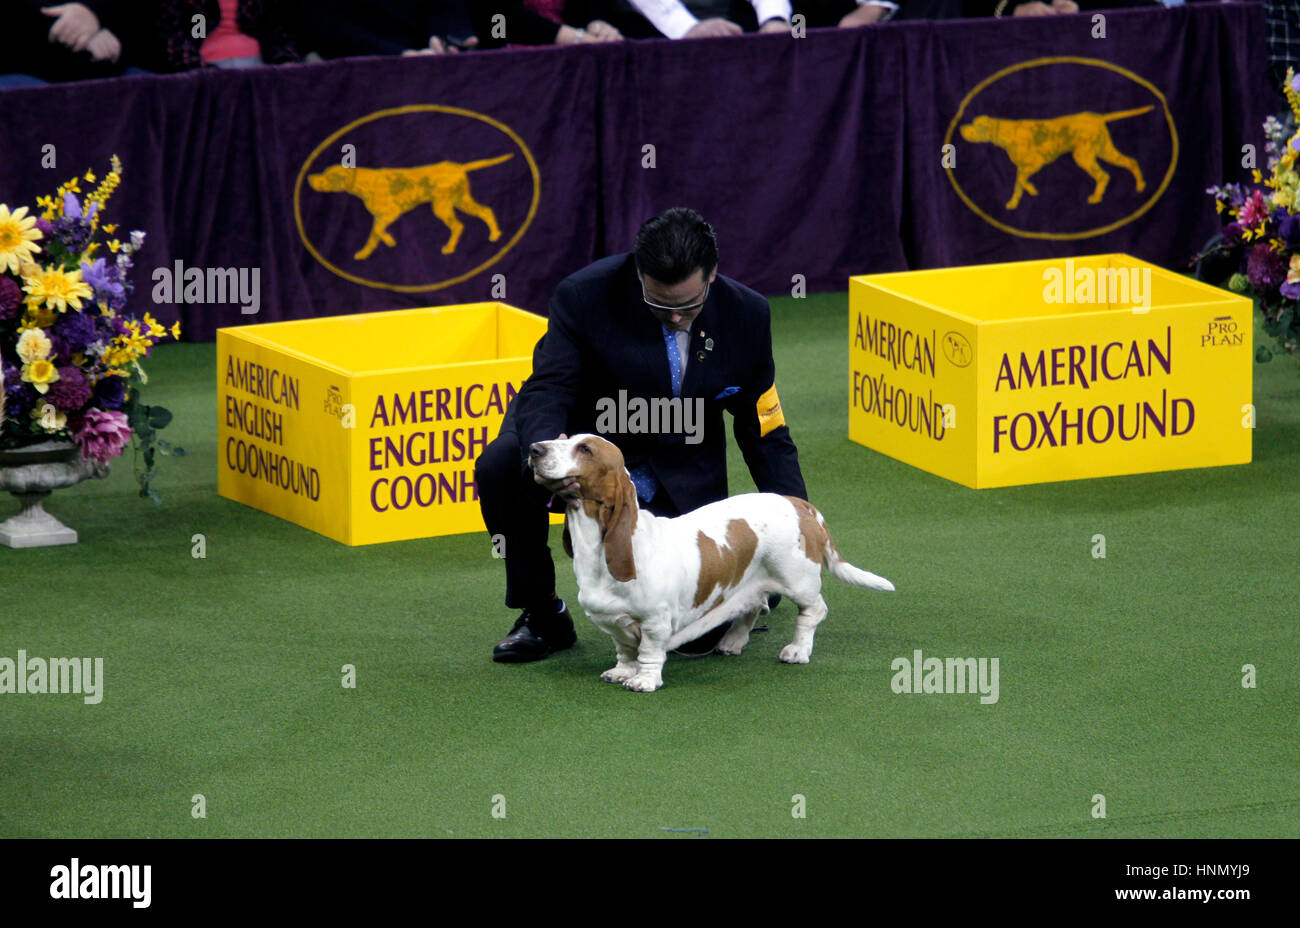 New York, United States. 13th Feb, 2017. 'GCH CH Blossomhil's Topsfield Sanchu A Little Princess', A Basset Hound preparing to be inspected during competition in the Toy Division at the 141st Annual Westminster Dog Show at Madison Square Garden in New York City on February 13th, 2017. Credit: Adam Stoltman/Alamy Live News Stock Photo